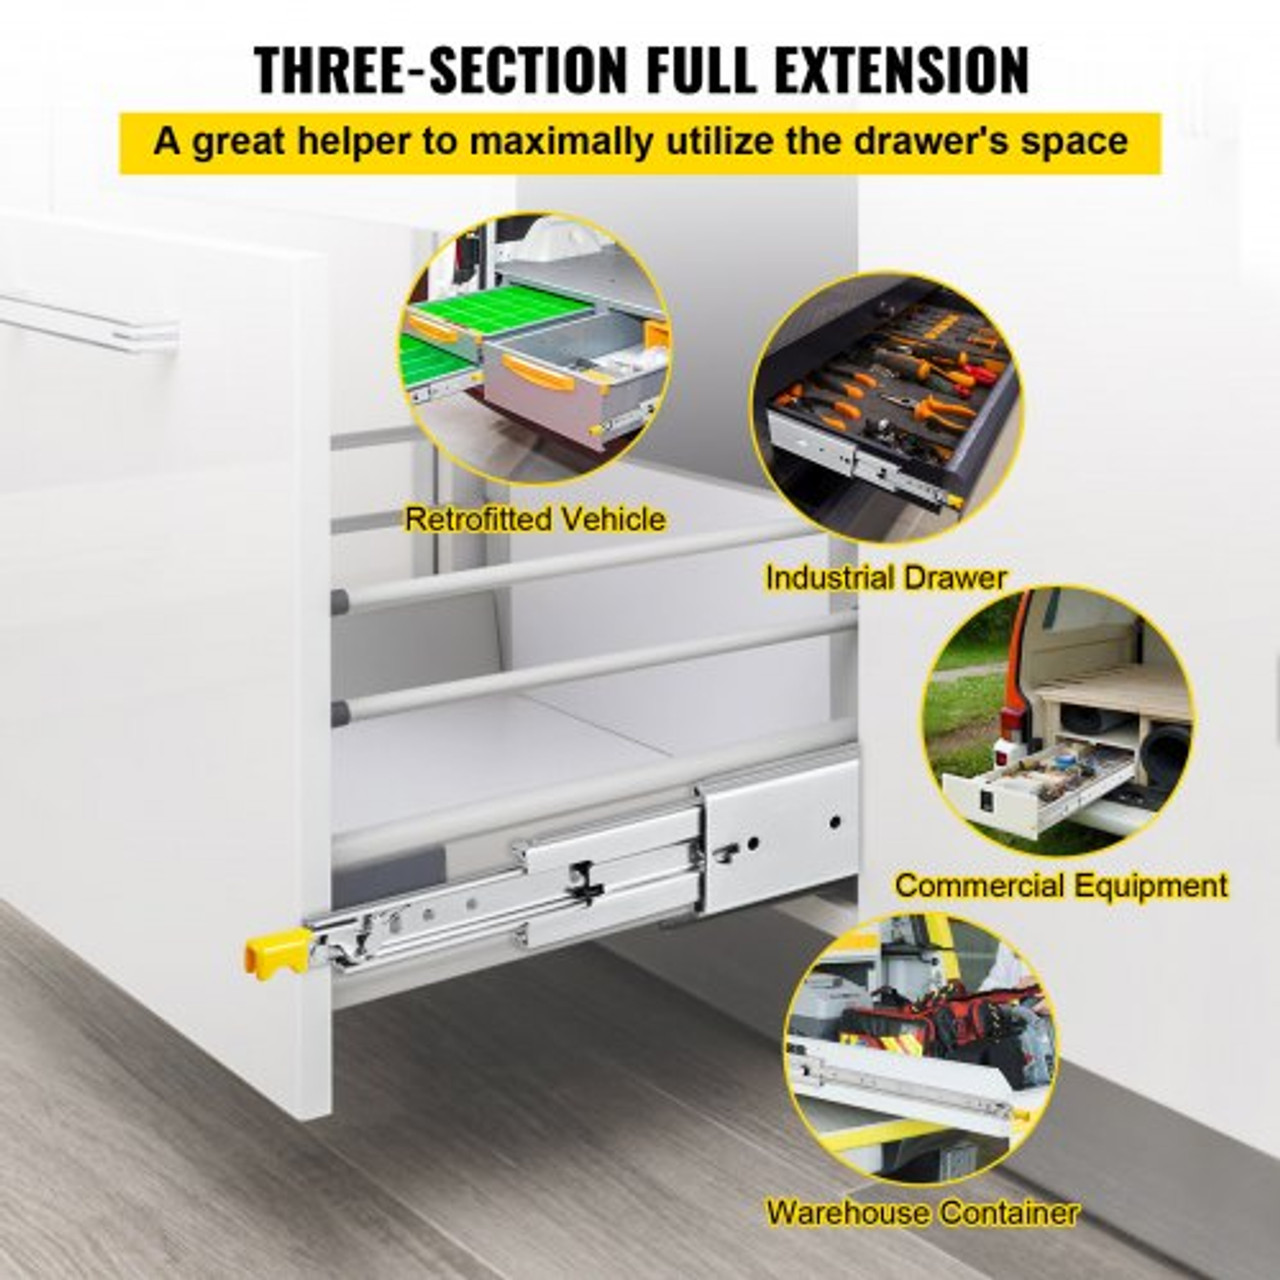 Drawer Slides with Lock, 1 Pair 44 inch, Heavy-Duty Industrial Steel up to 500 lbs Capacity, 3-Fold Full Extension, Ball Bearing Lock-in & Lock-Out, Side Mount